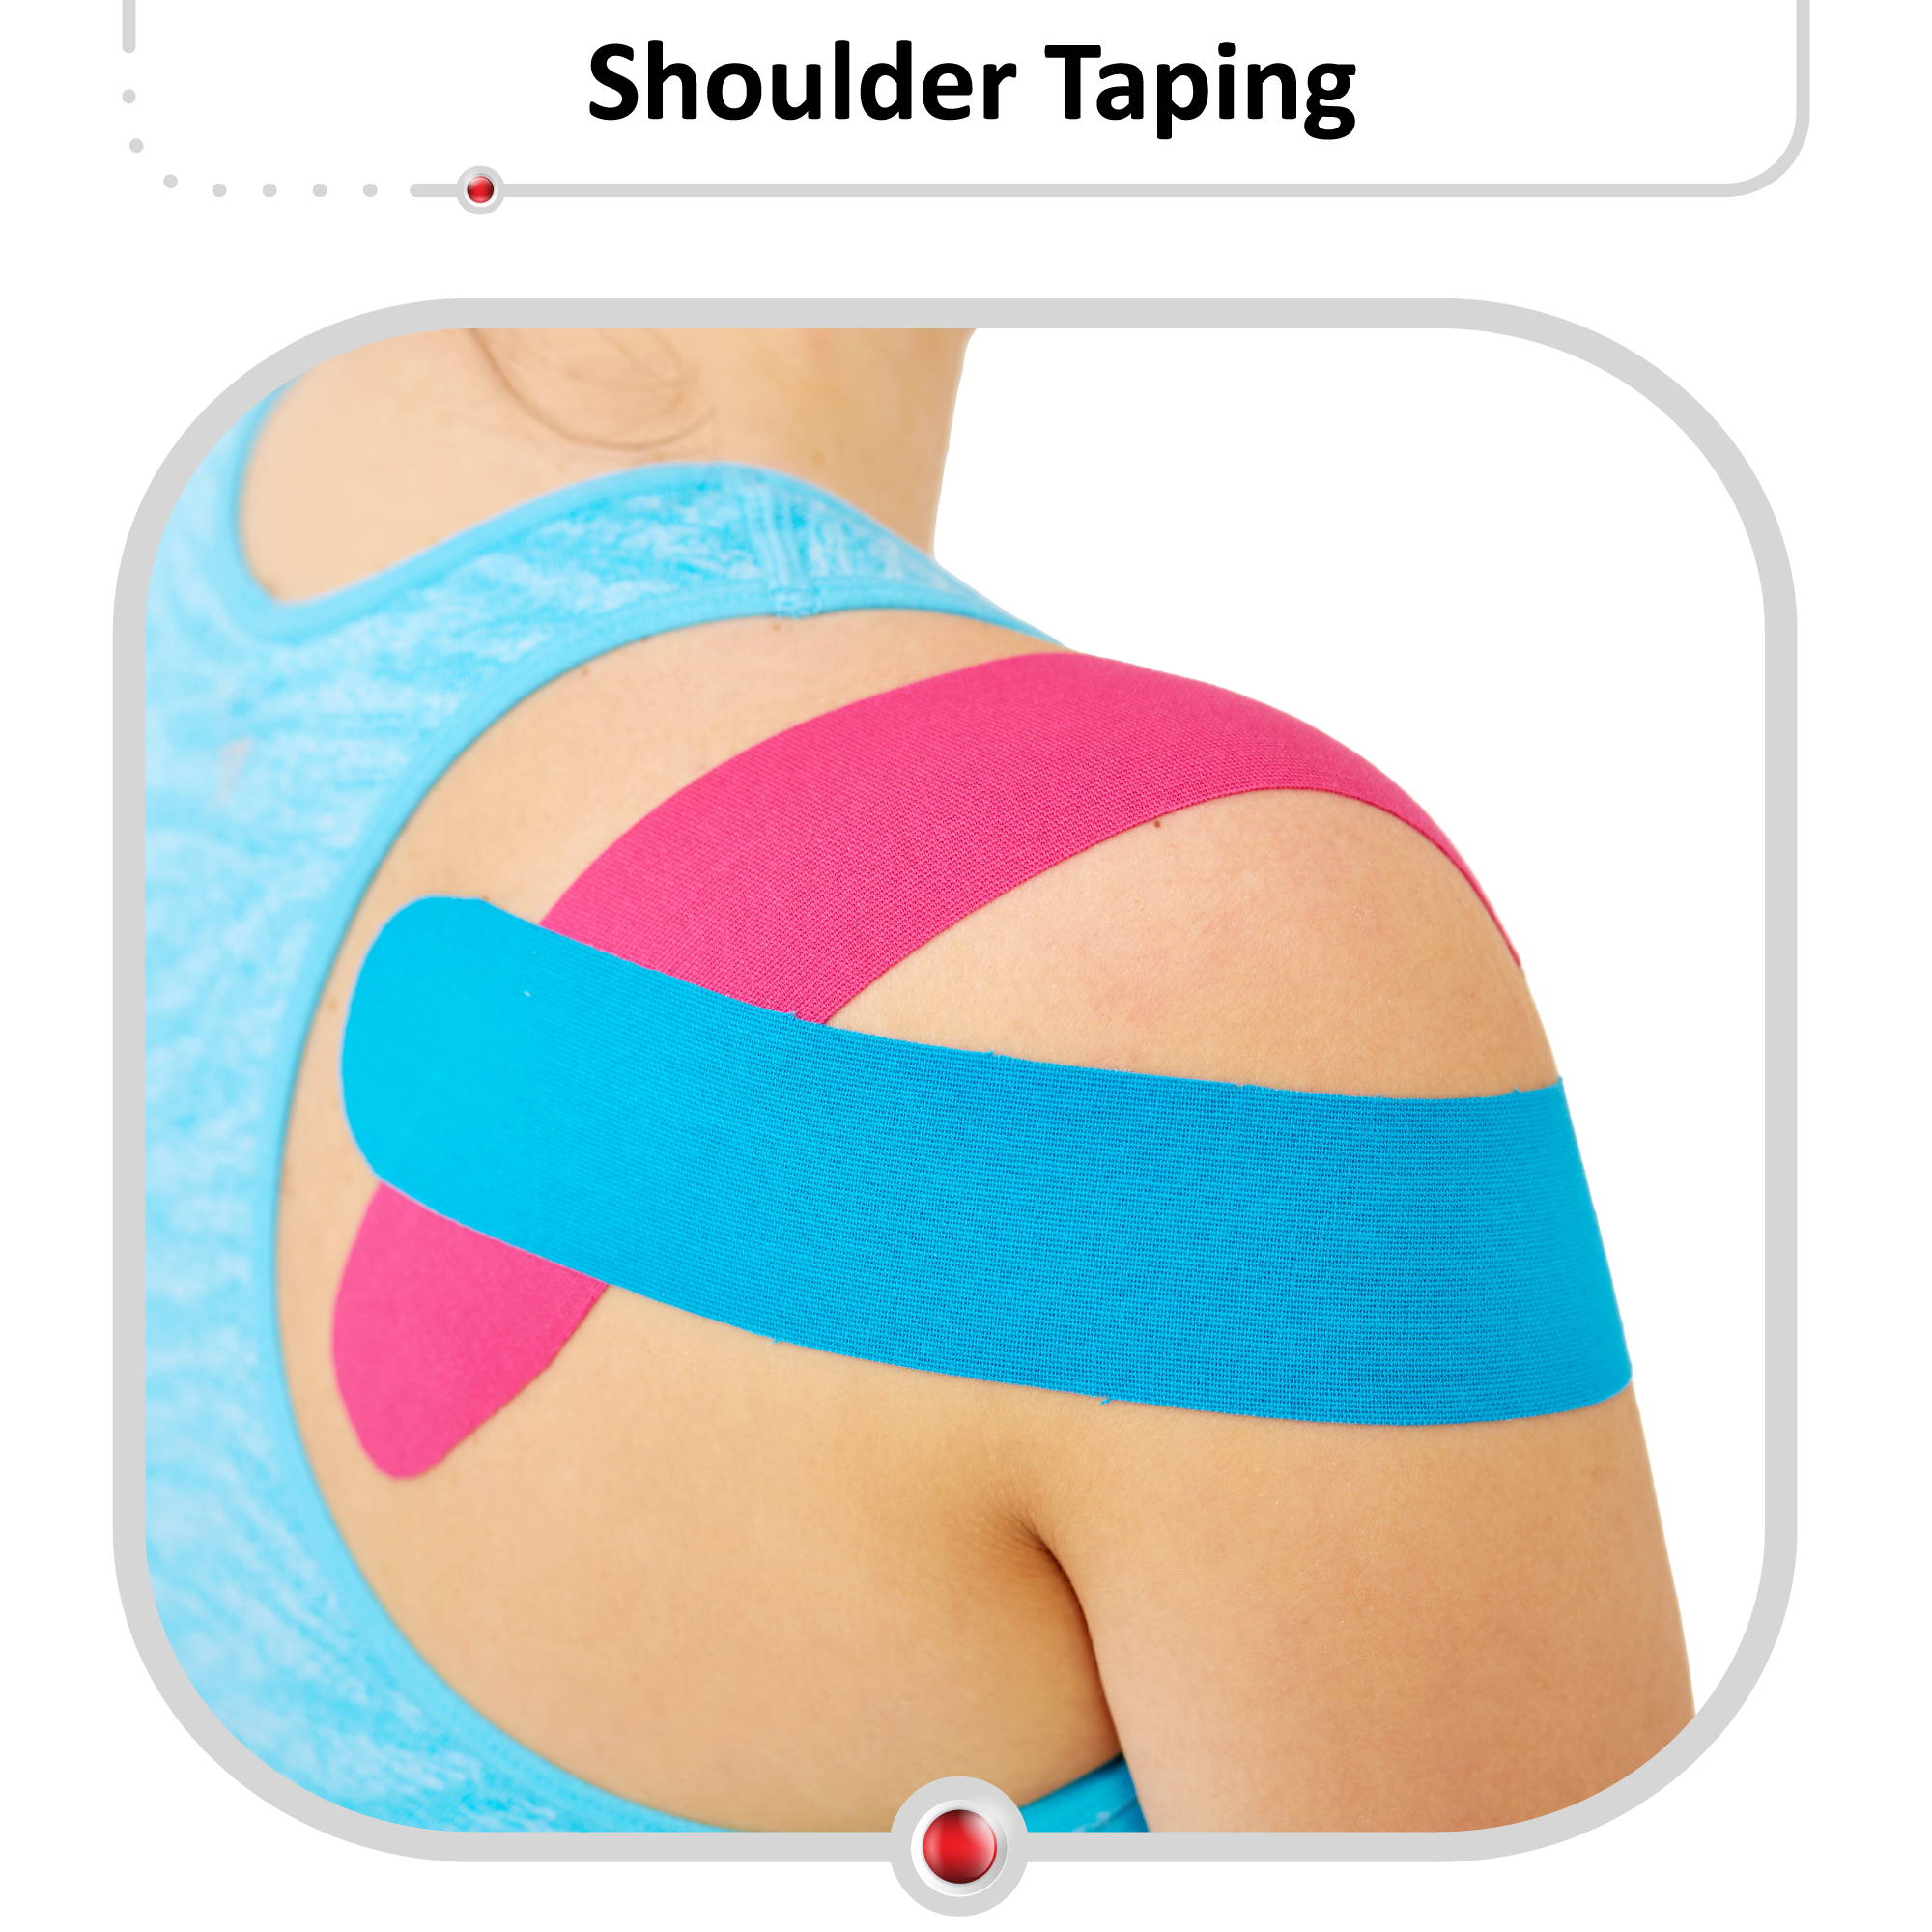 Kinesio tape and shoulder pain: Is it worth the hype?